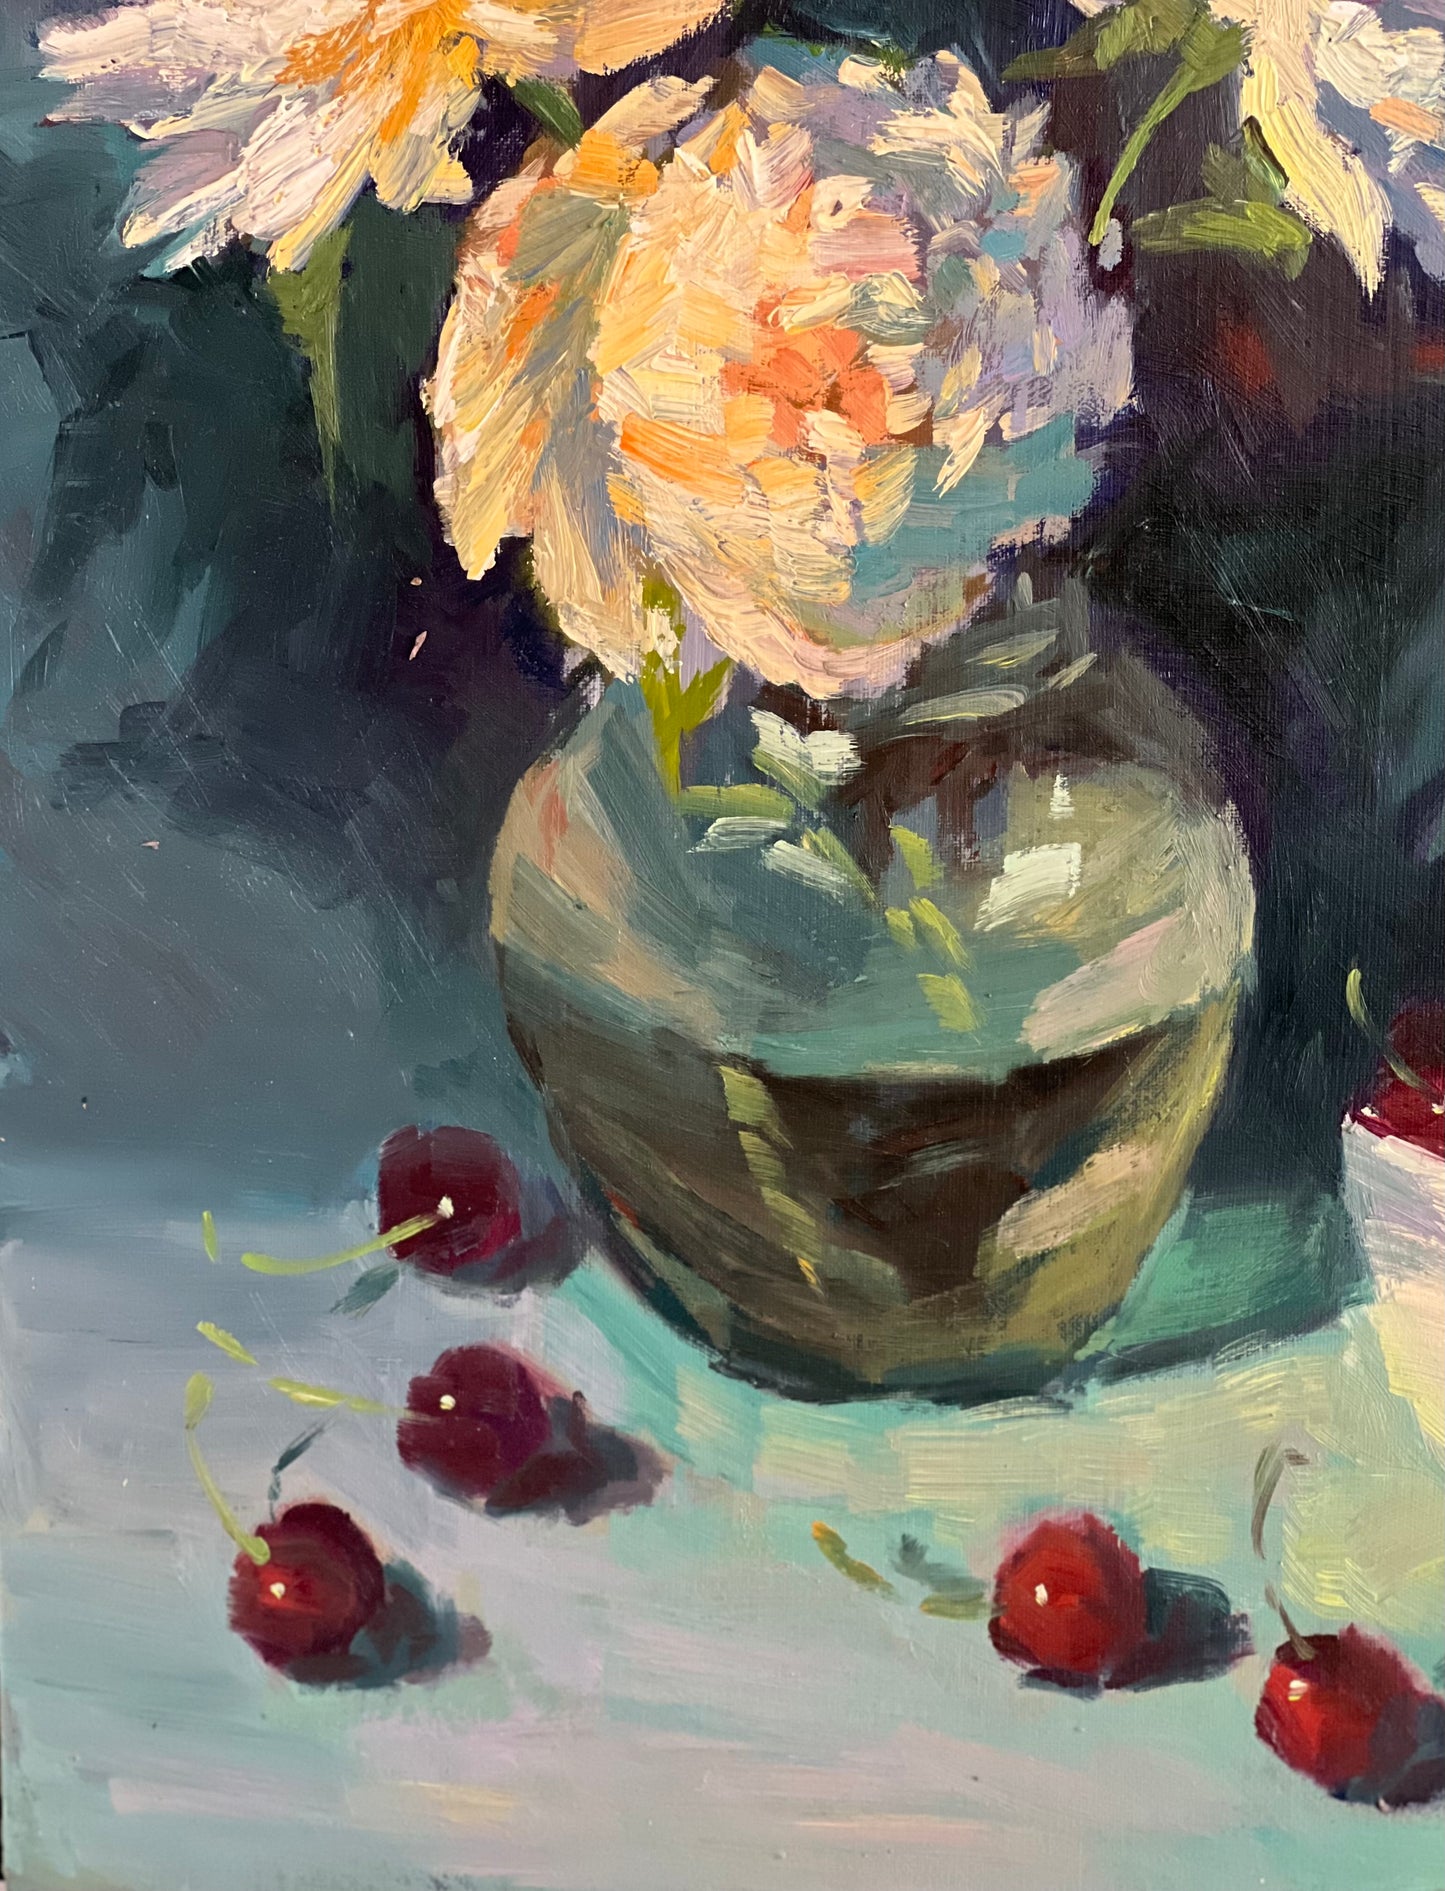 Peony Nocturne with Cherries!  - Large Original Oil Painting of Peony Flowers